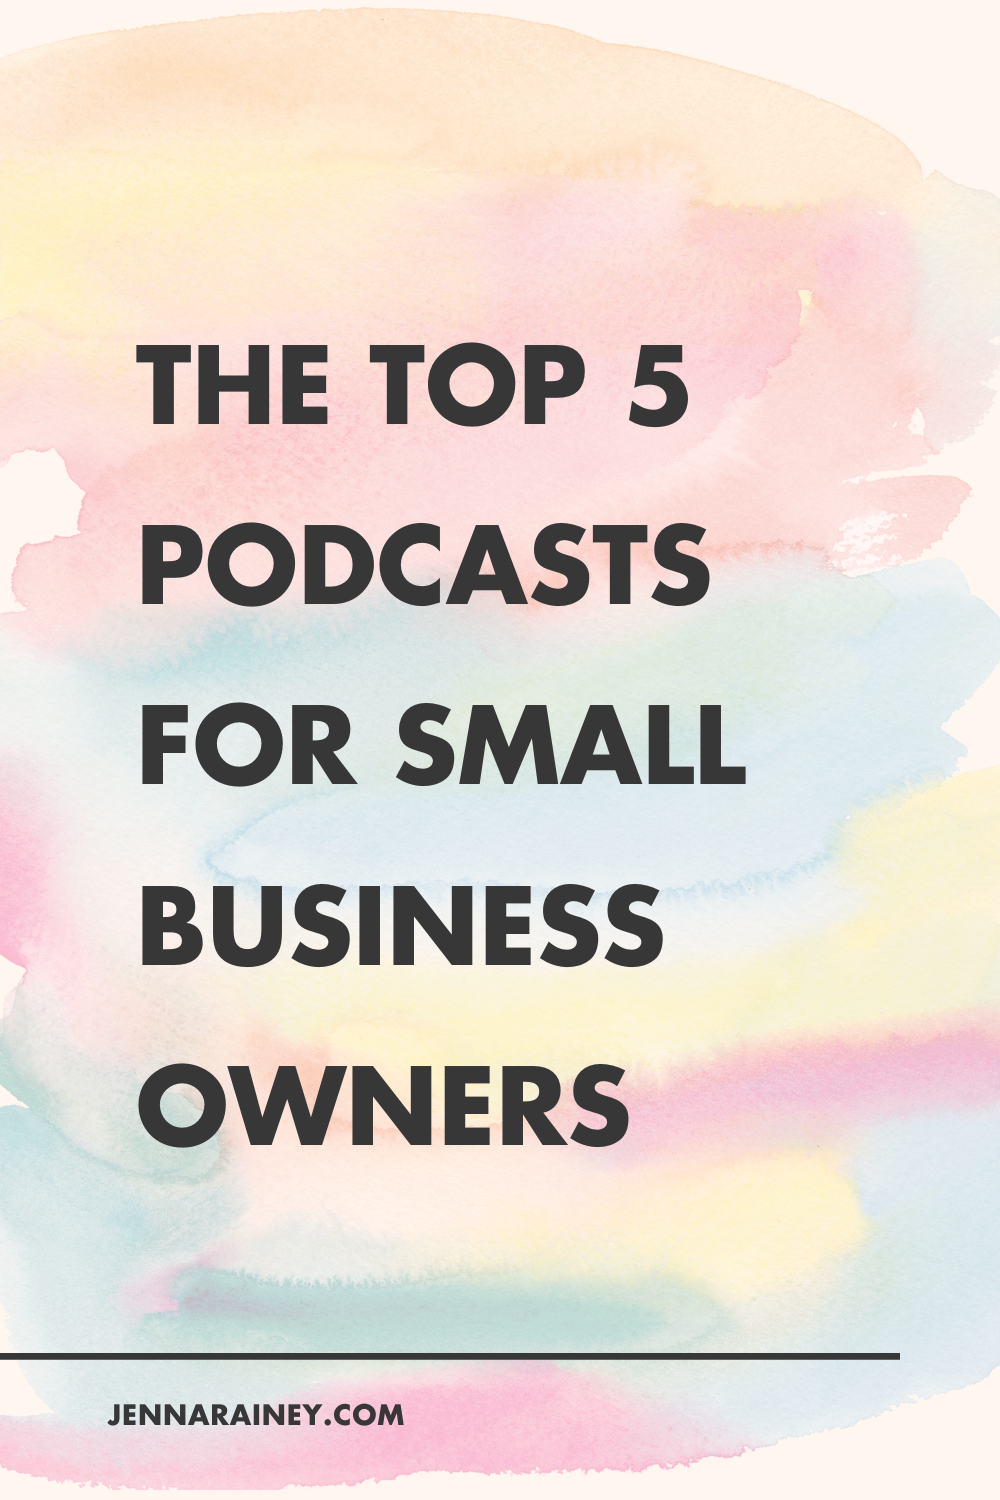 My 5 Favorite Podcasts for Creative Business Owners